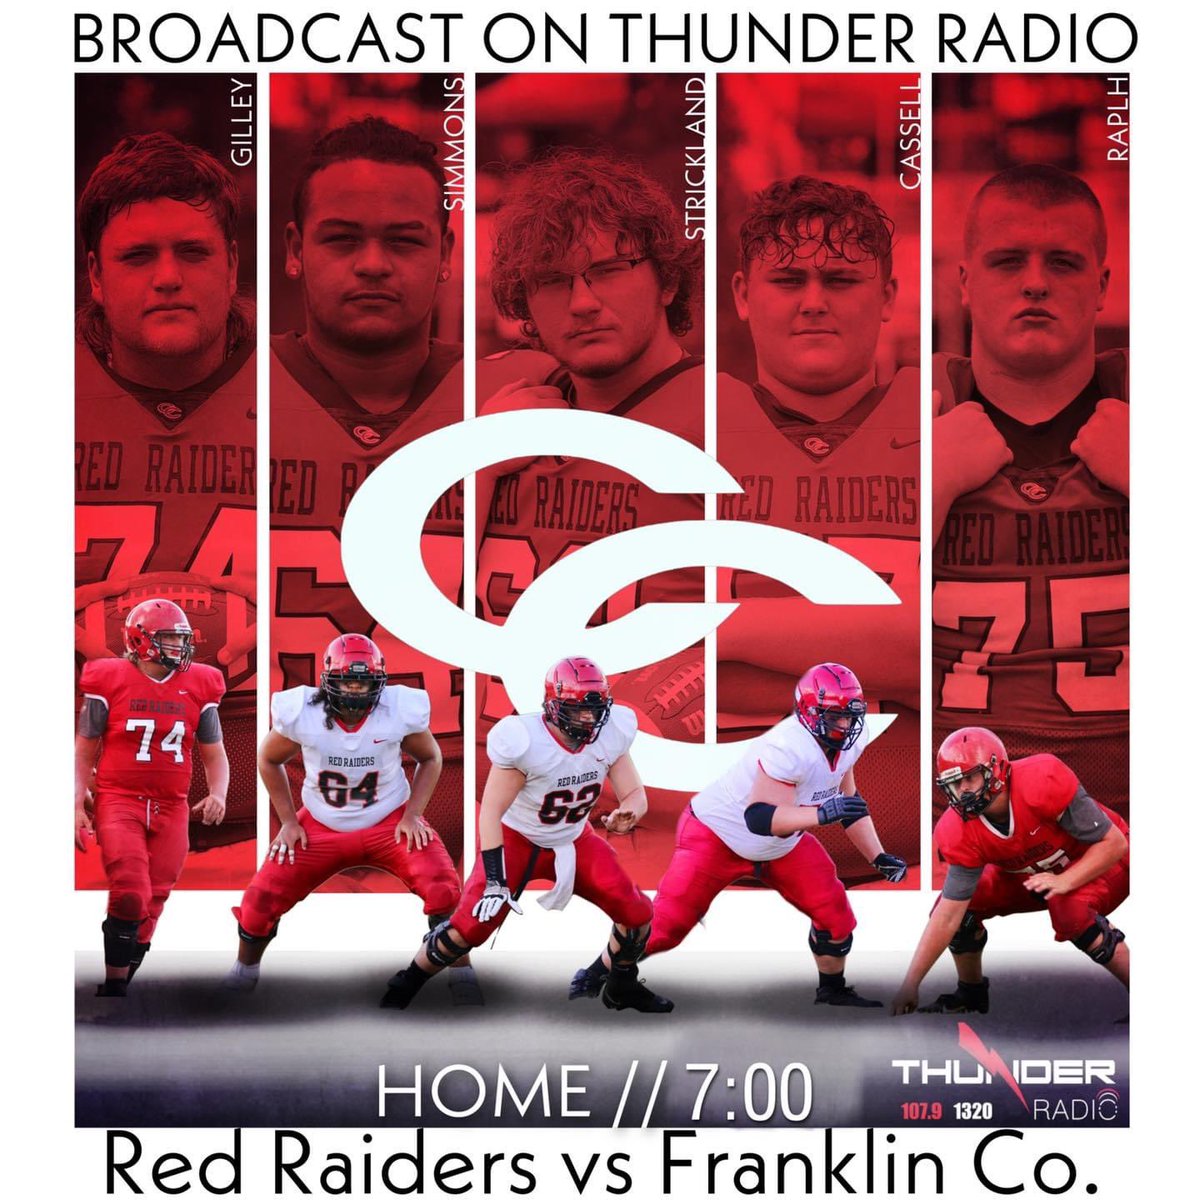 🚨 🏈 GAMEDAY 🏈 🚨 100 years of @CCCRaidersFB kicks off tonight! 🆚 Franklin Co ⌚️ 7pm 📍 865 McMinnville Hwy 🏟 Carden-Jarrell 📻 🎧 Friday Night Thunder Pregame starts at 6! 107.9FM | 1320AM | 106.7FM 📱 🎧 Manchester Go App 🖥 🎧 thunder1320.com